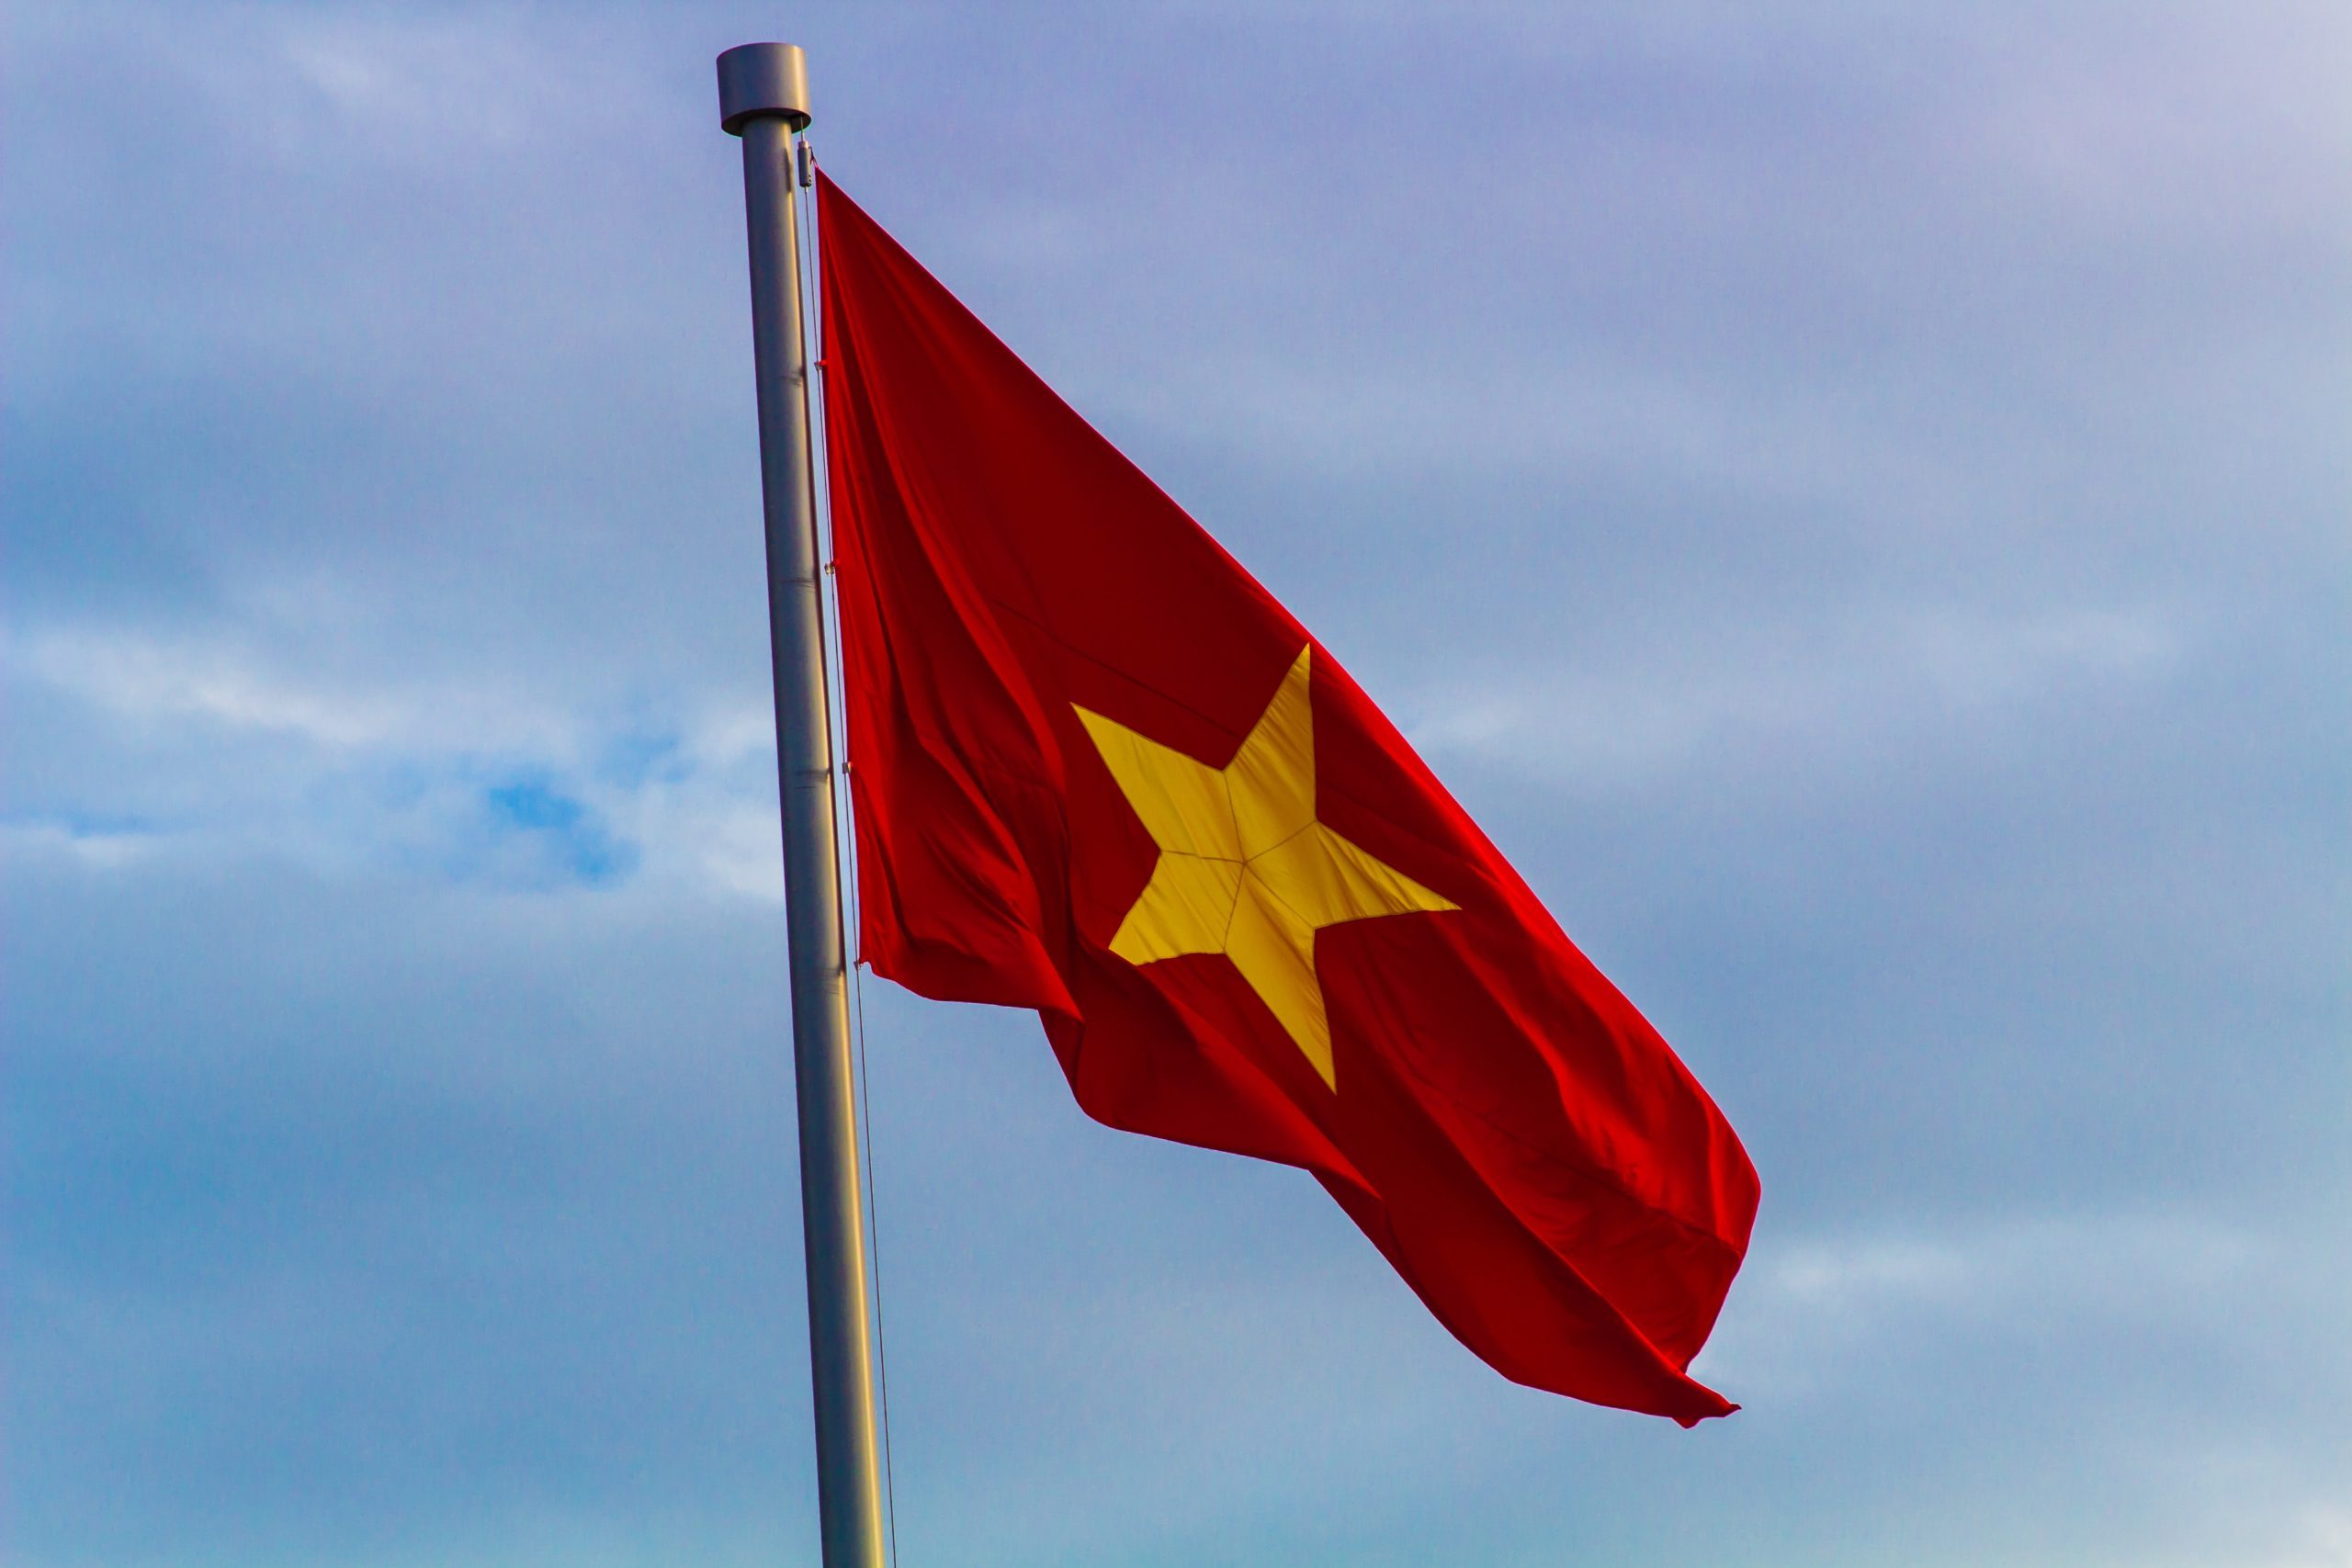 Investors expect more regional startups to emerge from Vietnam's digital space